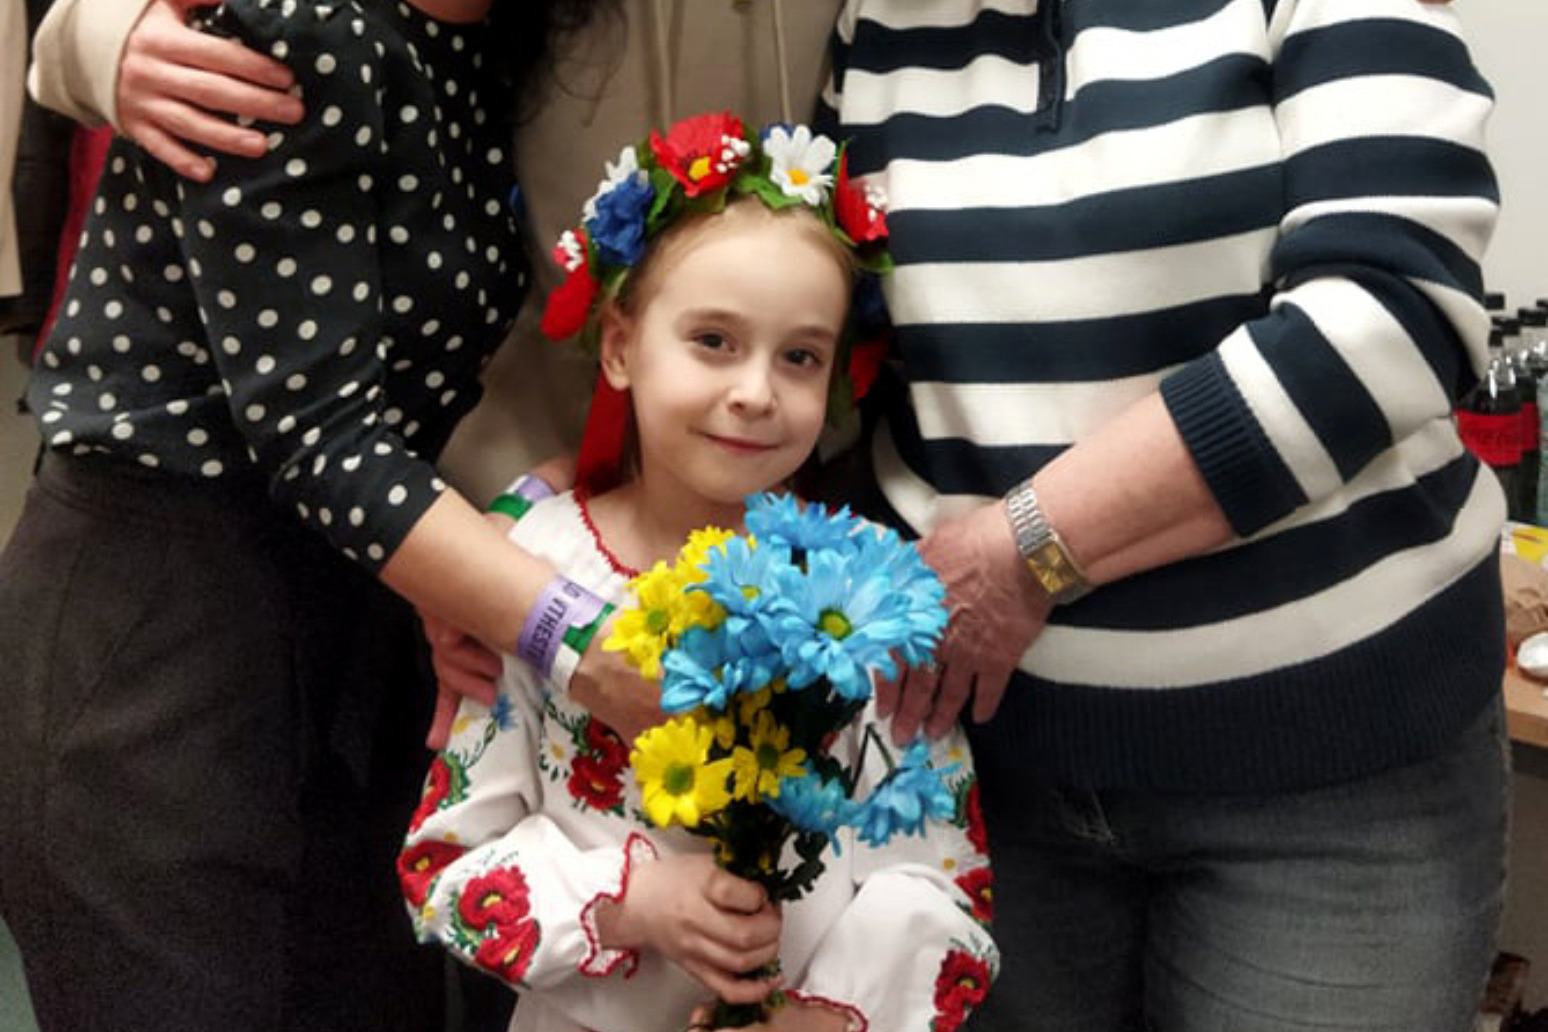 Ukrainian girl who sang Let It Go reunited with mother as she performs in Poland 